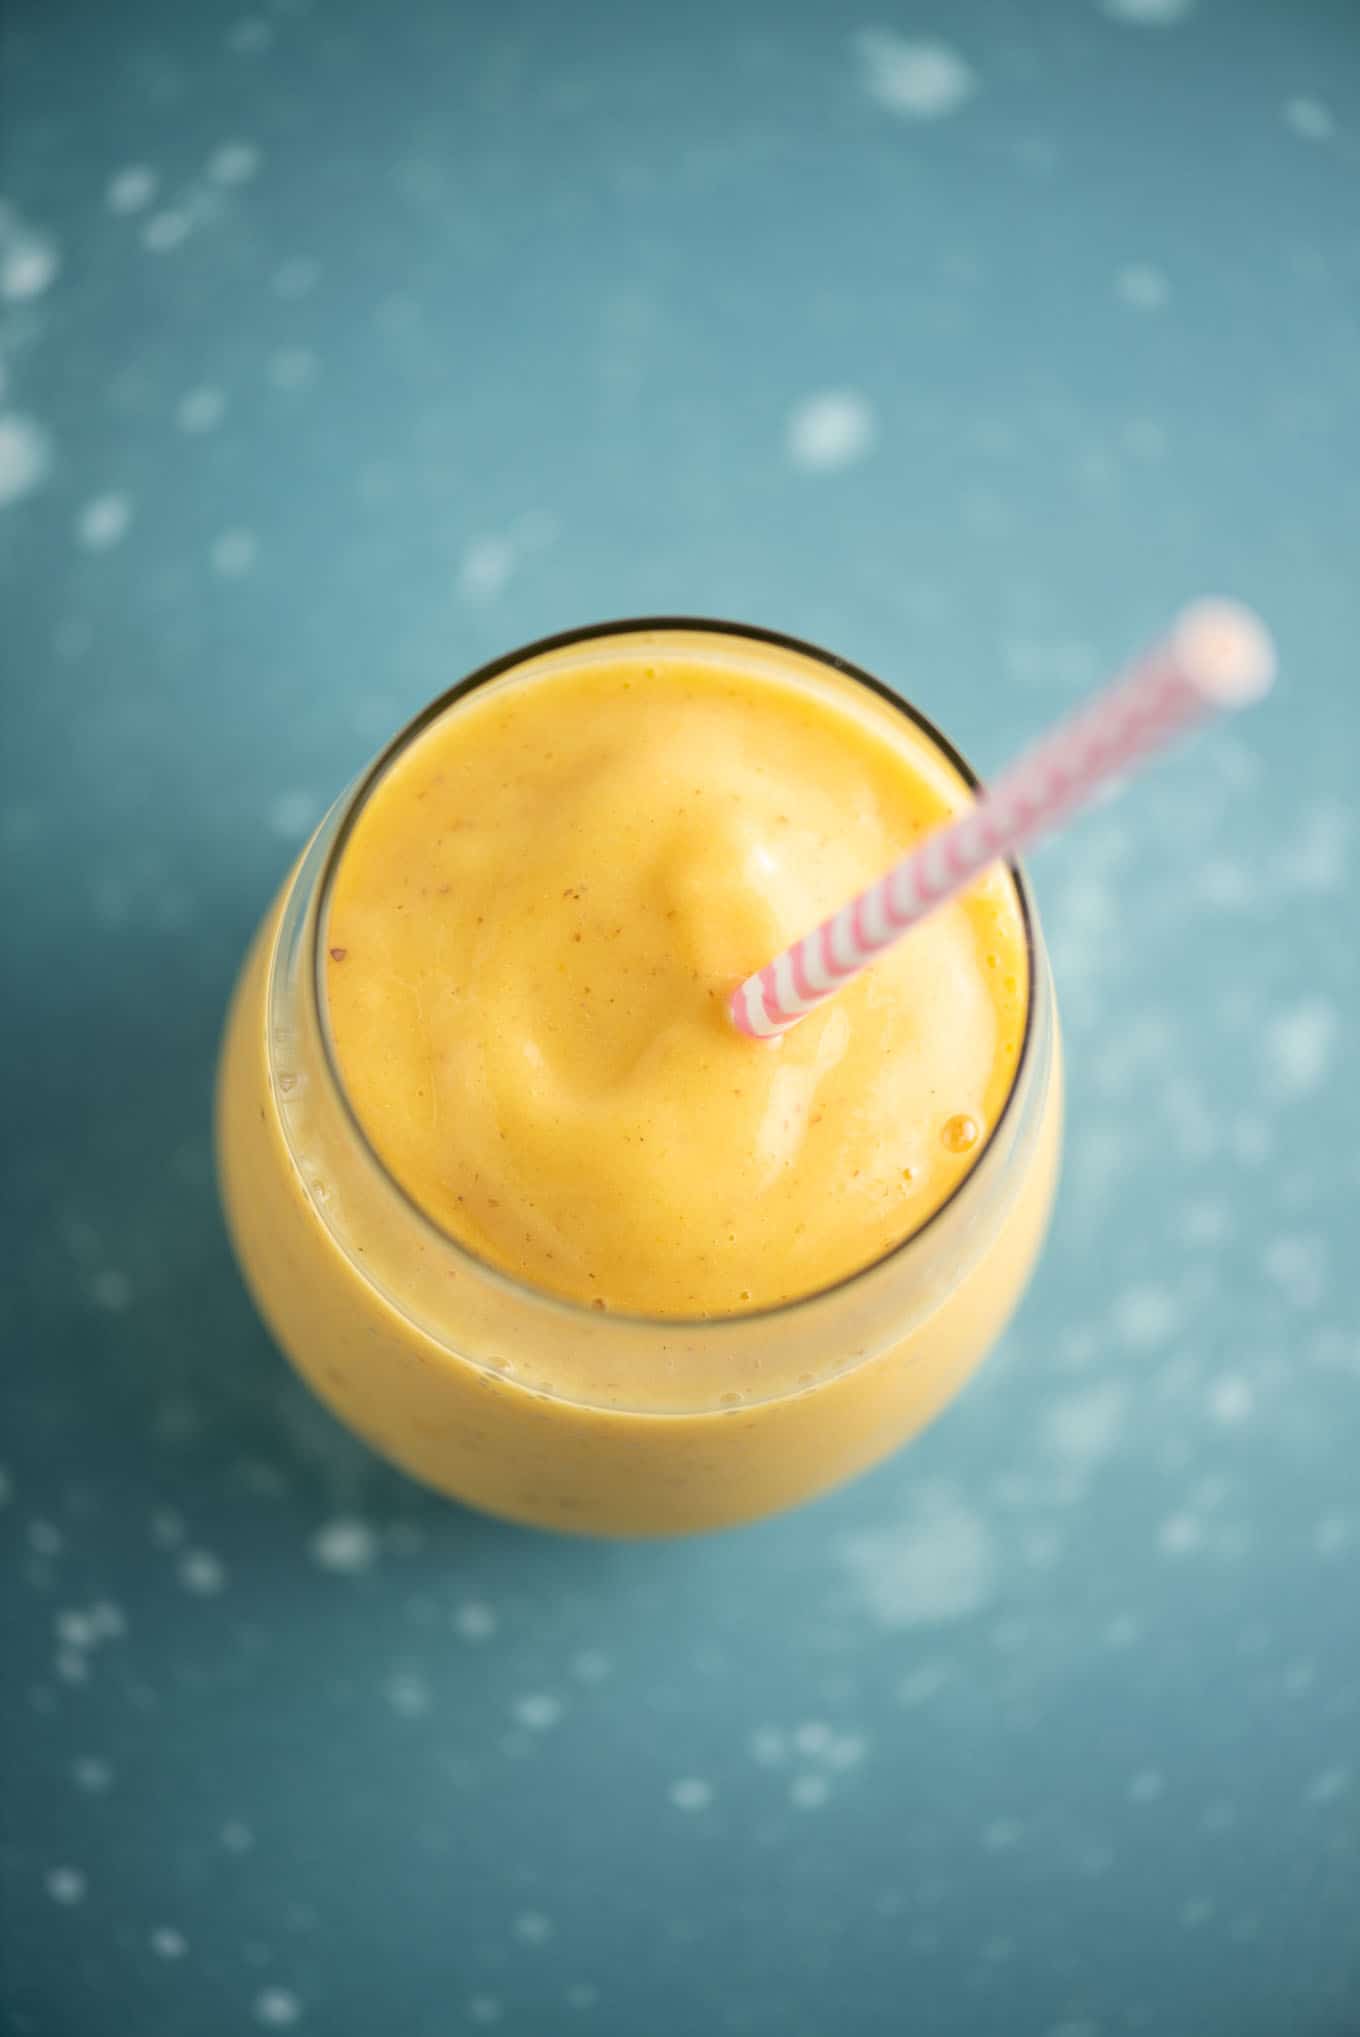 mango and pineapple smoothie recipe in a glass